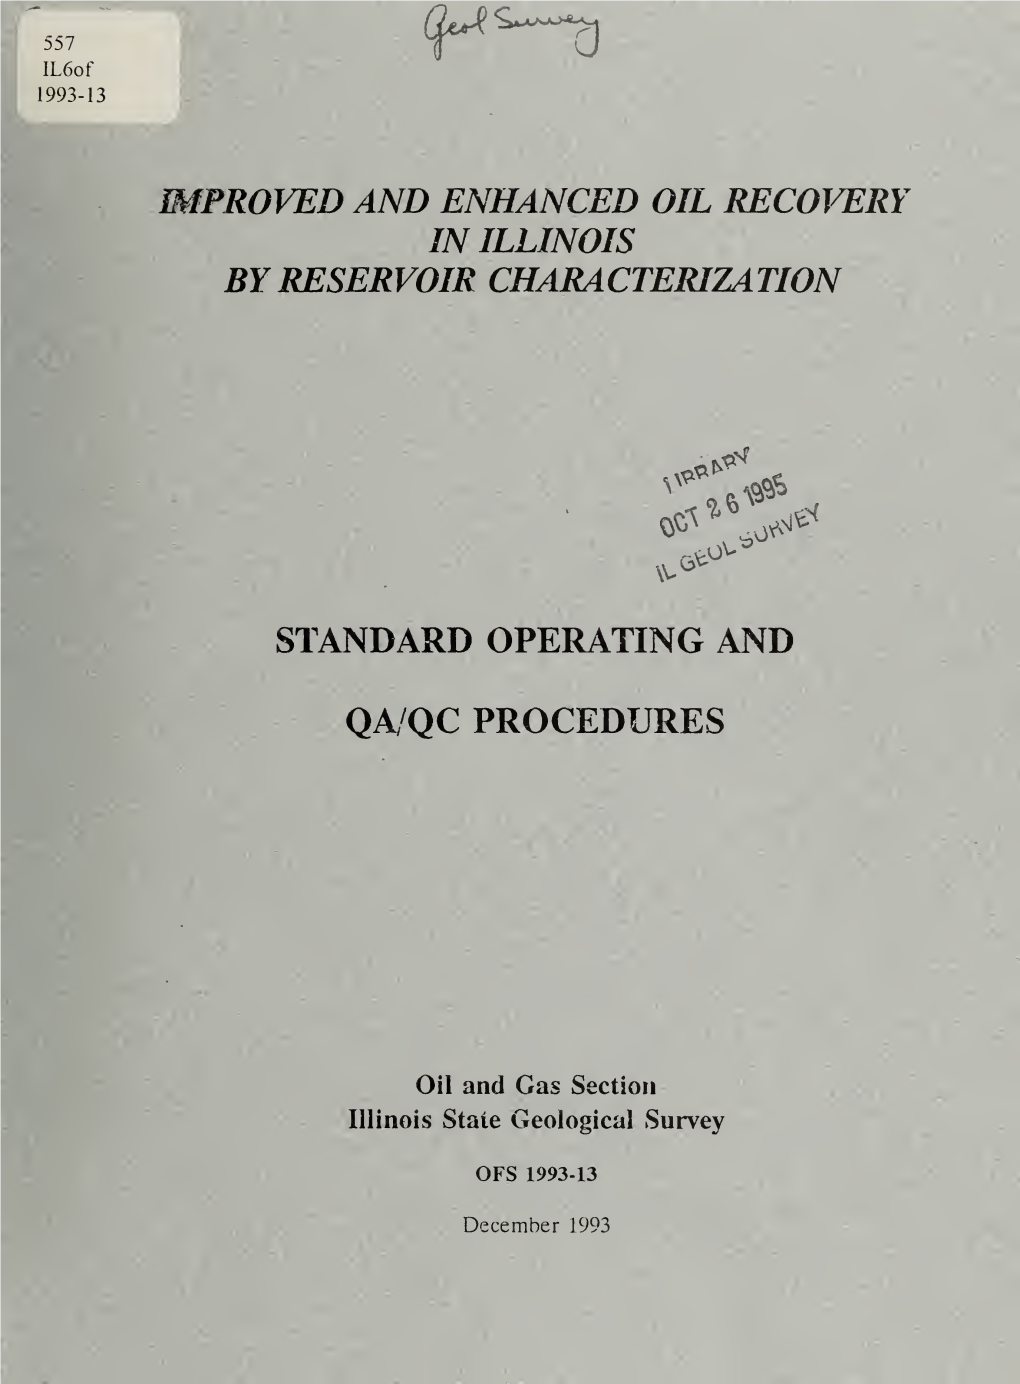 Improved and Enhanced Oil Recovery in Illinois by Reservoir Characterization